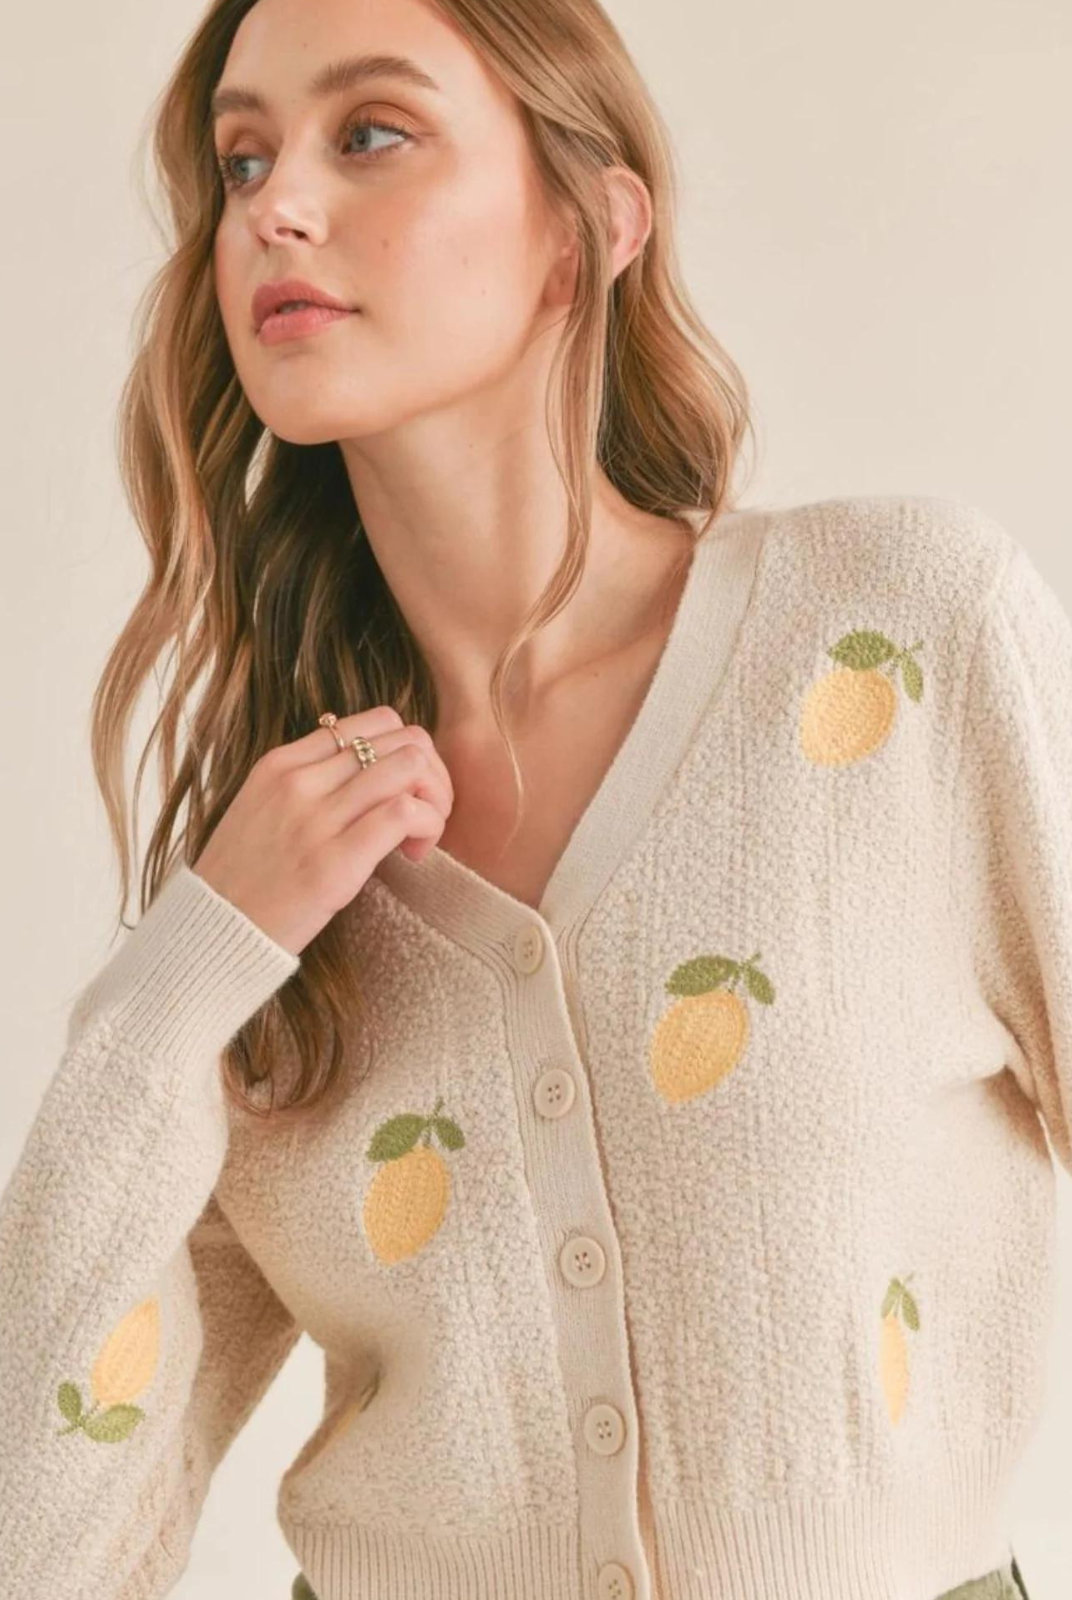 Sadie and Sage Esme Lemon Cardigan. Elevate your wardrobe with the Esme Lemon Cardigan! This cream button front cardigan features delicate embroidered lemon details on the front, creating a fresh and playful look. Perfect for adding a touch of whimsy to any outfit. Style #AG1417